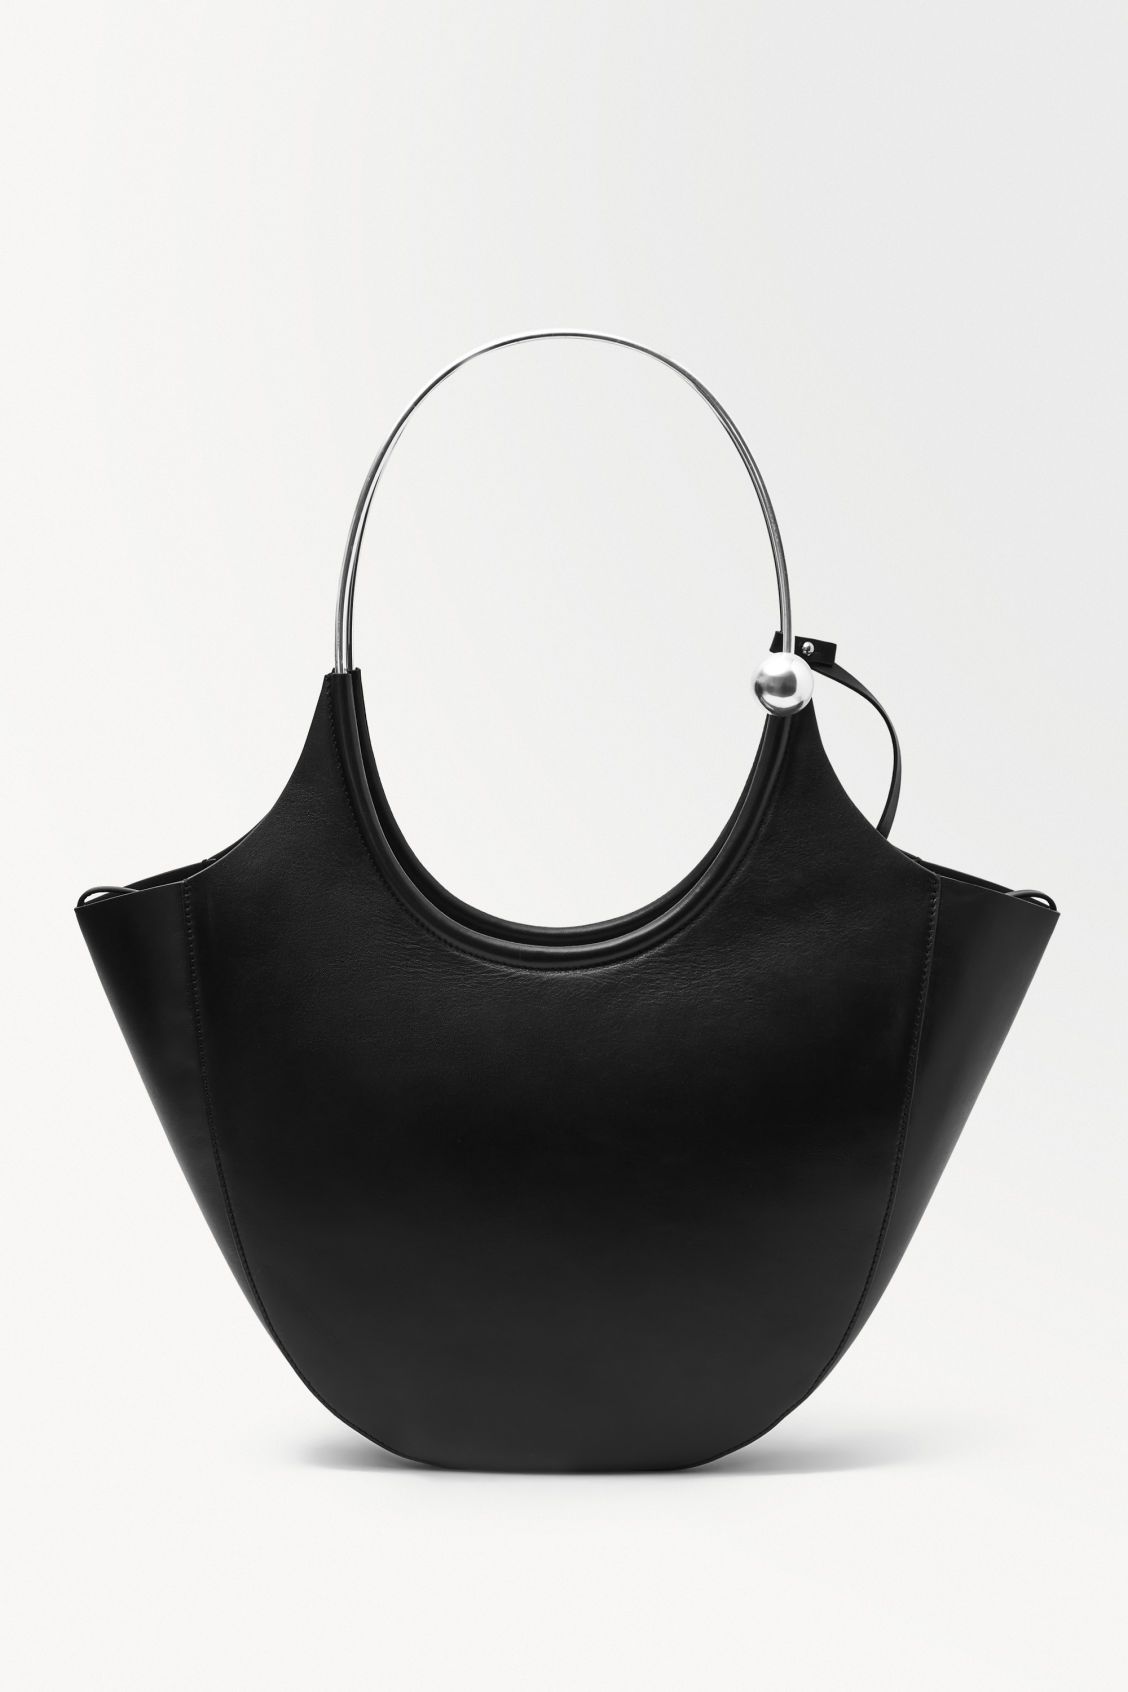 THE HALO LEATHER TOTE - BLACK - Bags - COS | COS (US)